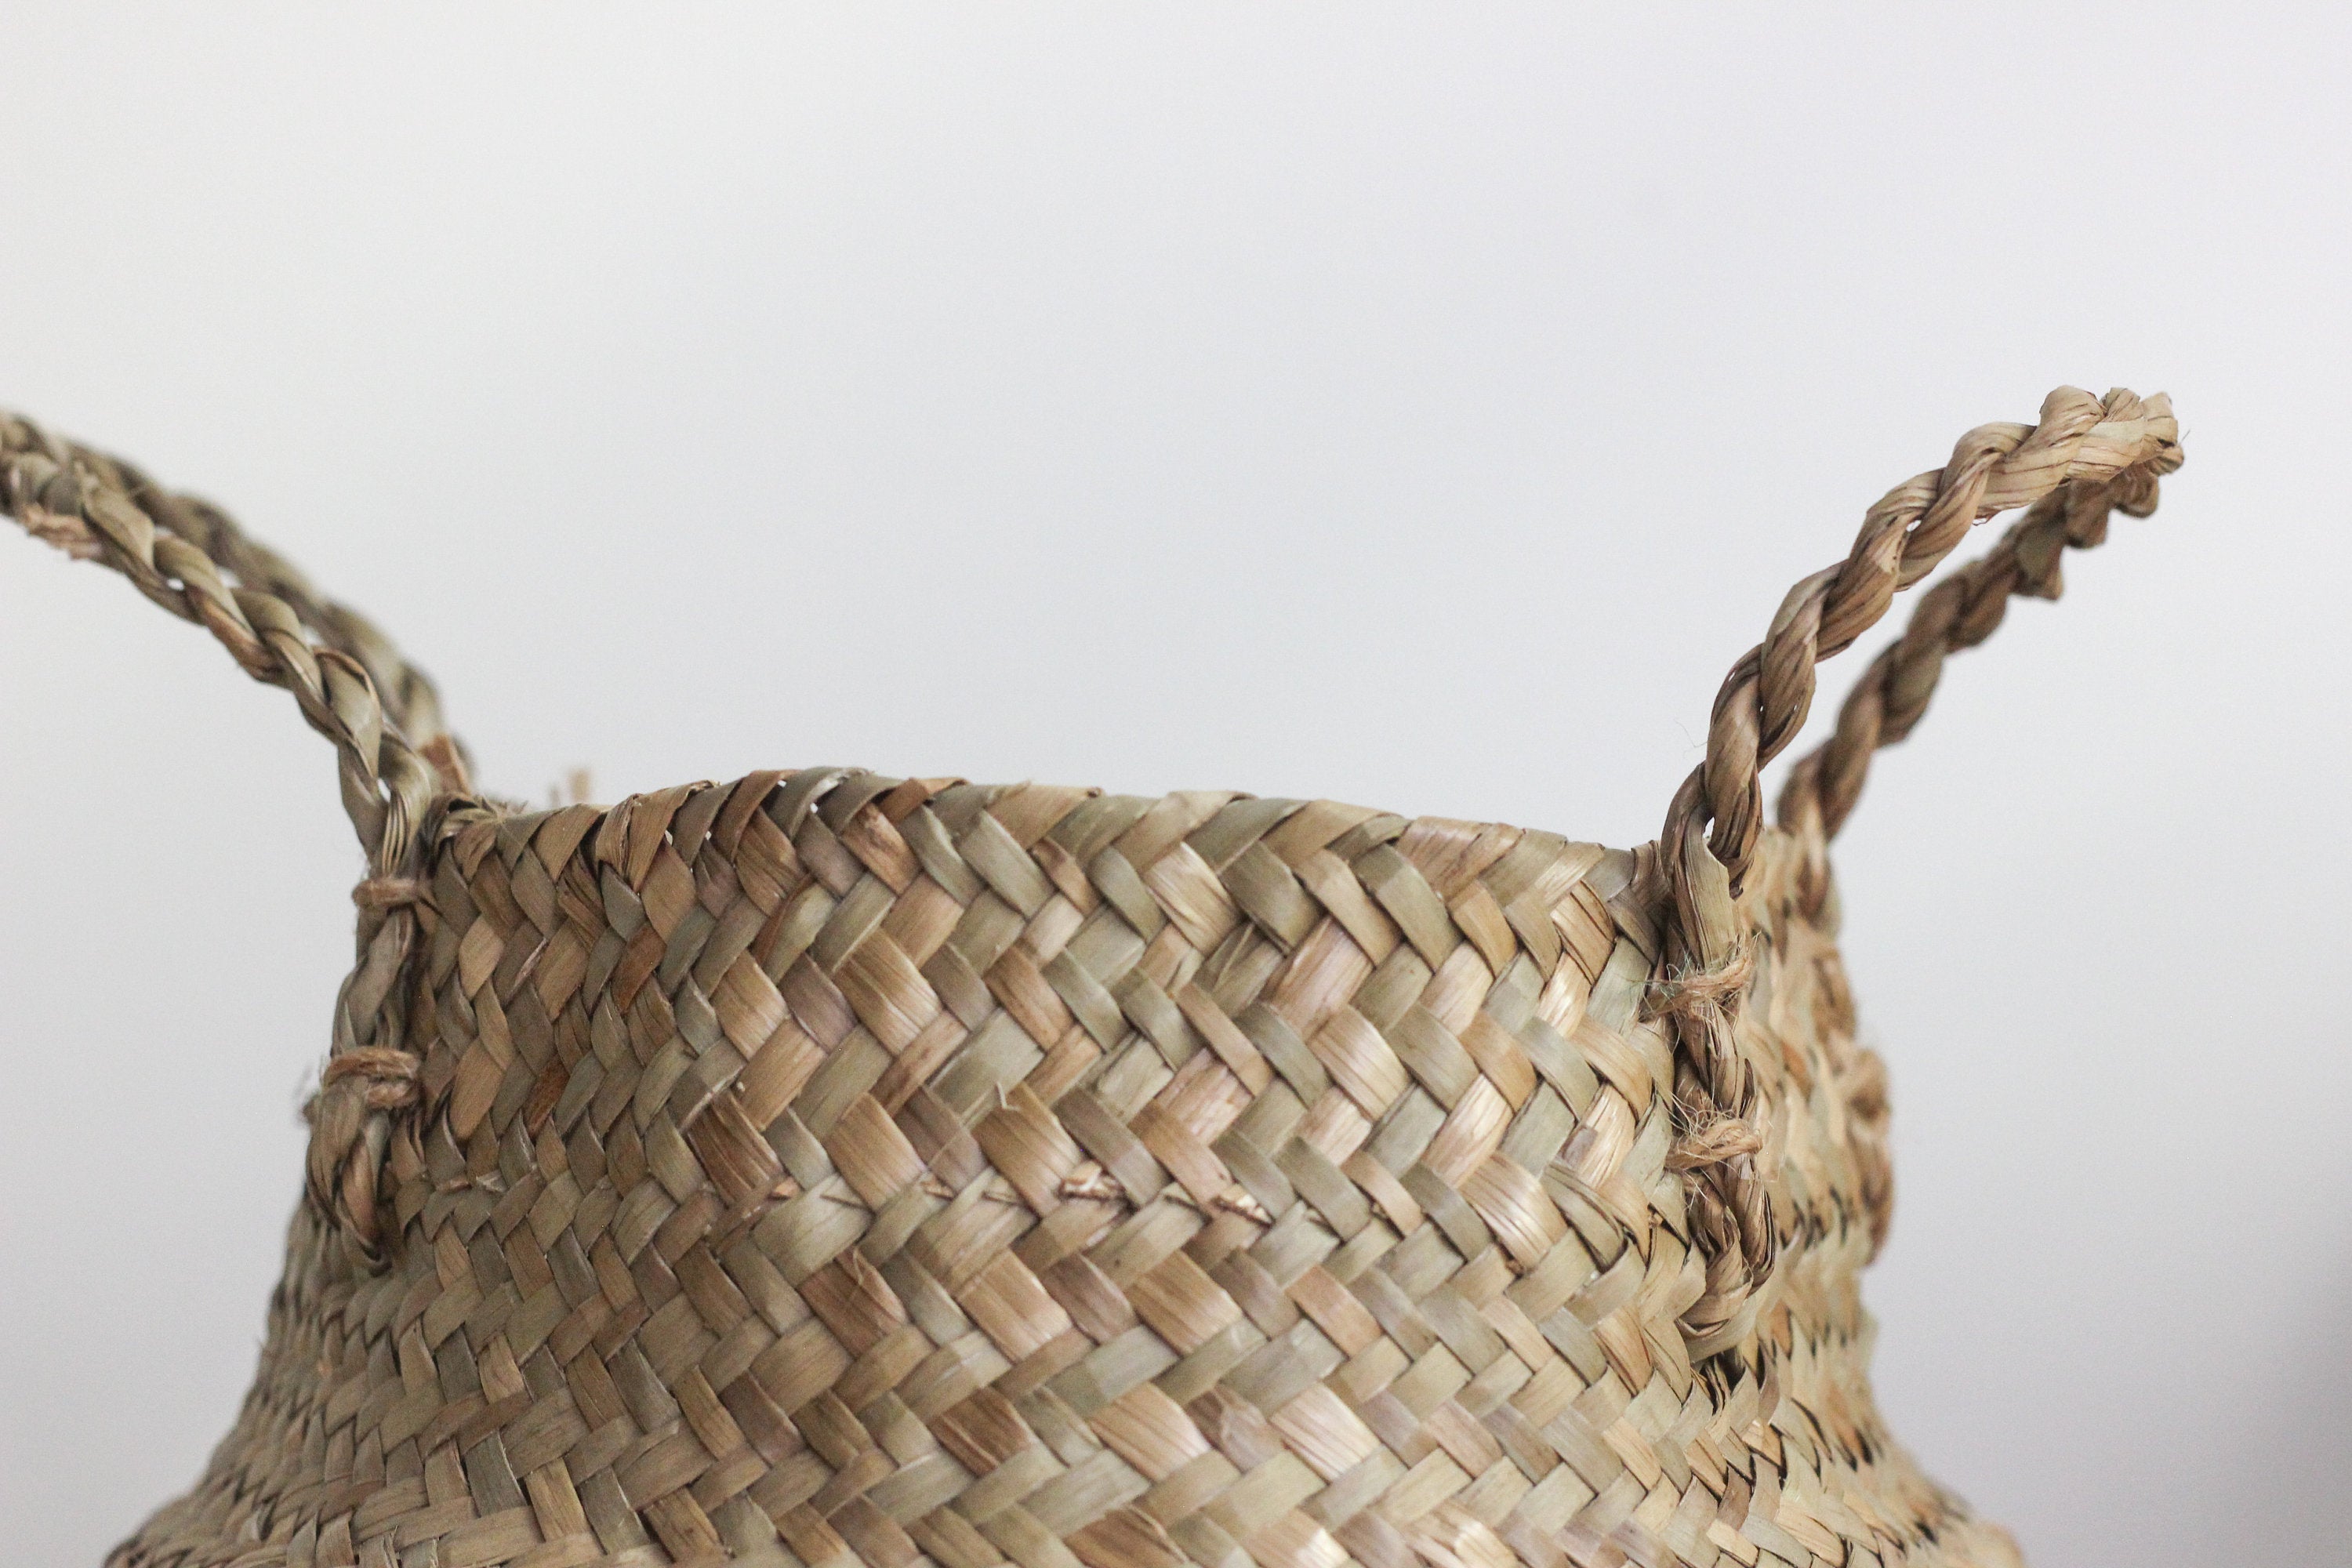 Woven Seagrass Belly Basket Planter